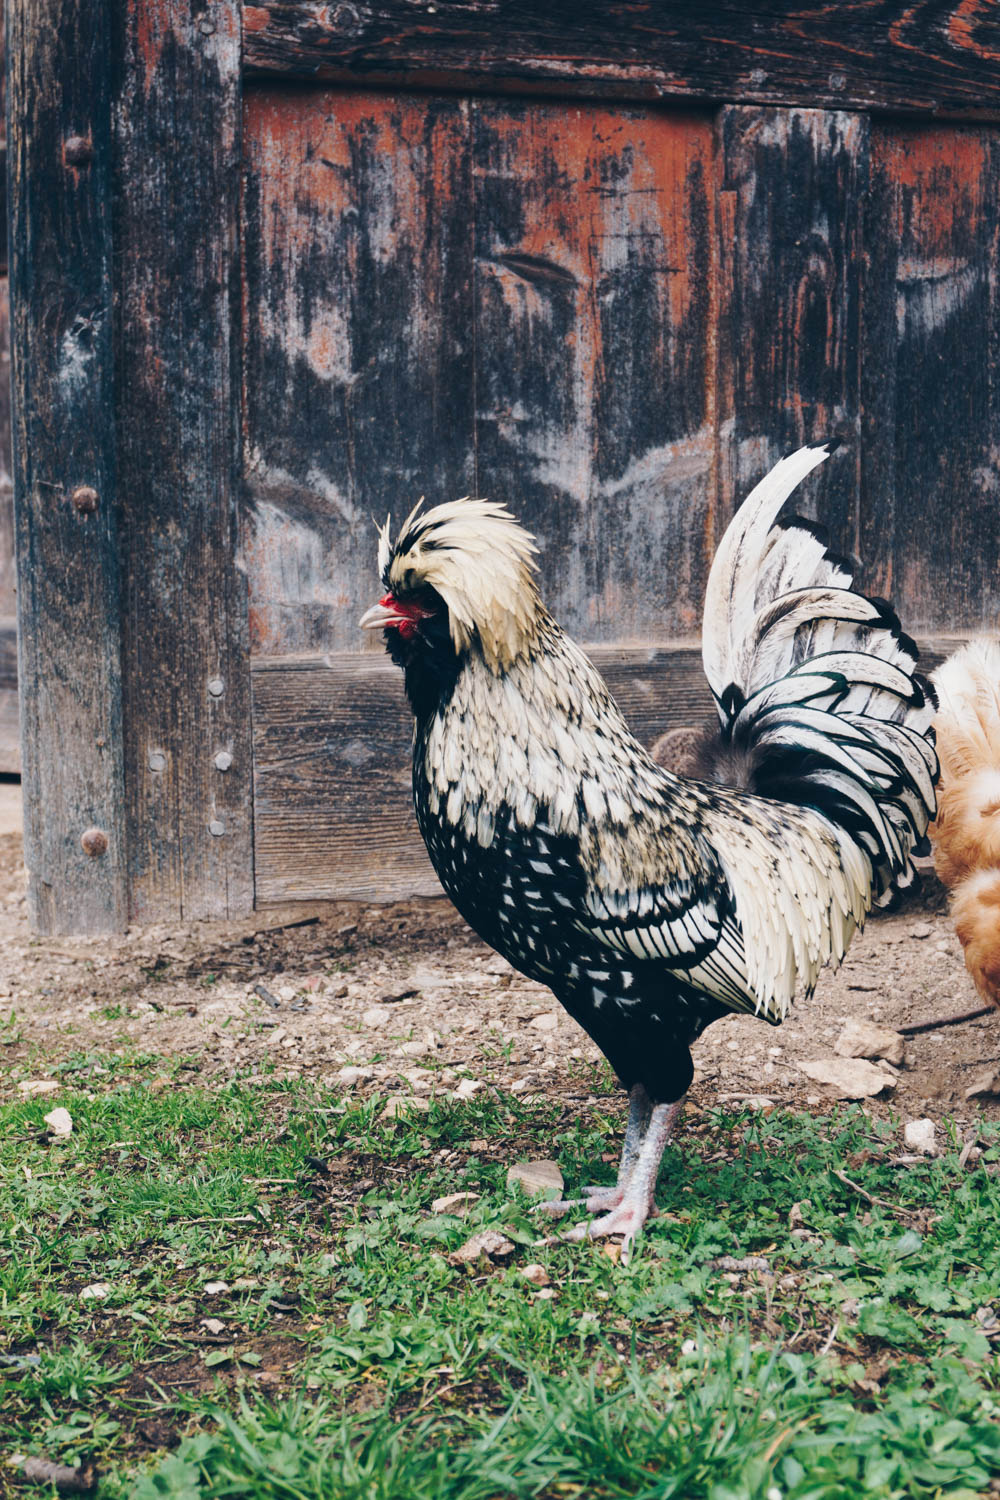 Chateau de Burnand, Burgundy France - French Countryside Chickens - RG Daily Blog